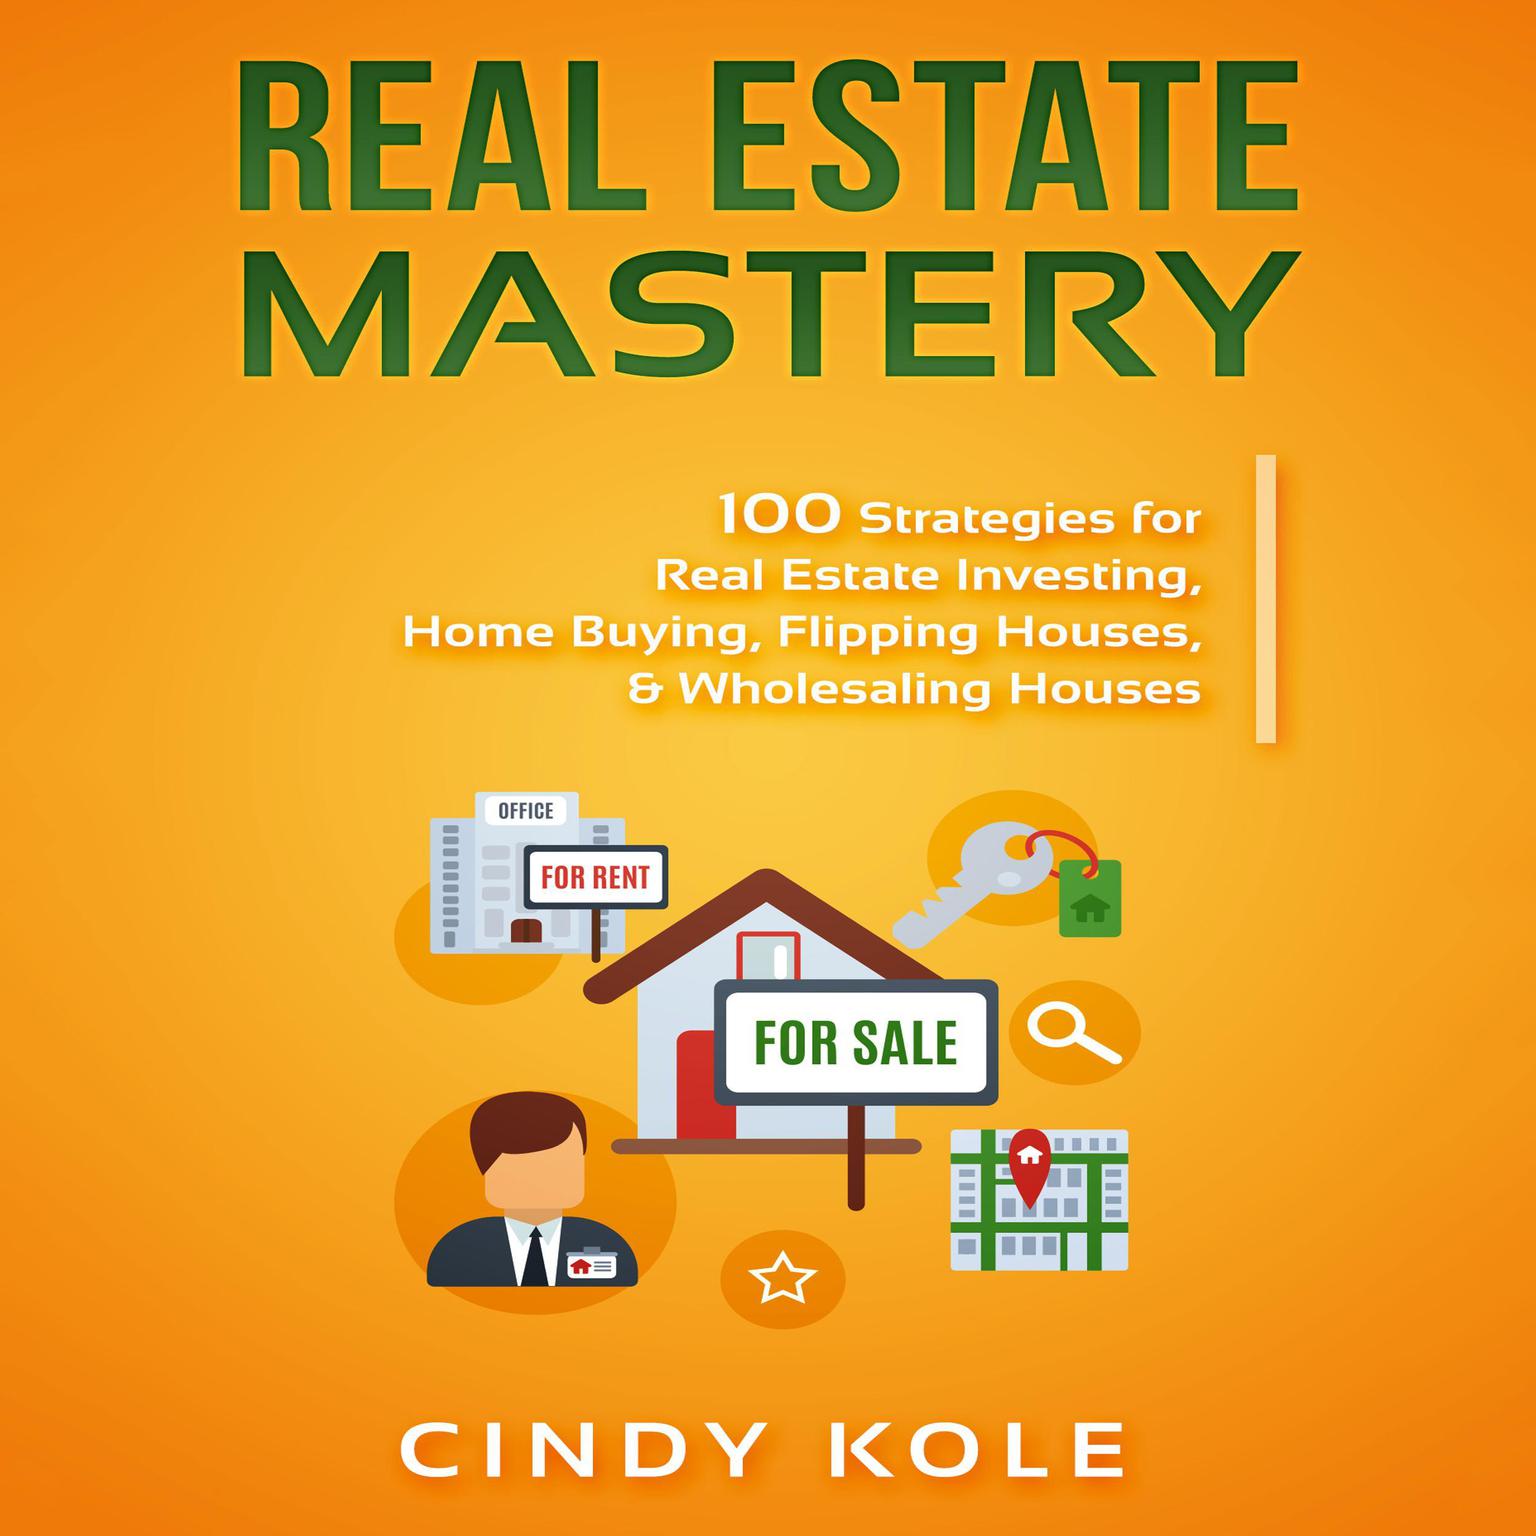 Real Estate Mastery: 100 Strategies for Real Estate Investing, Home Buying, Flipping Houses, & Wholesaling Houses (LLC Small Business, Real Estate Agent Sales, Money Making Entrepreneur Series) Audiobook, by Cindy Kole